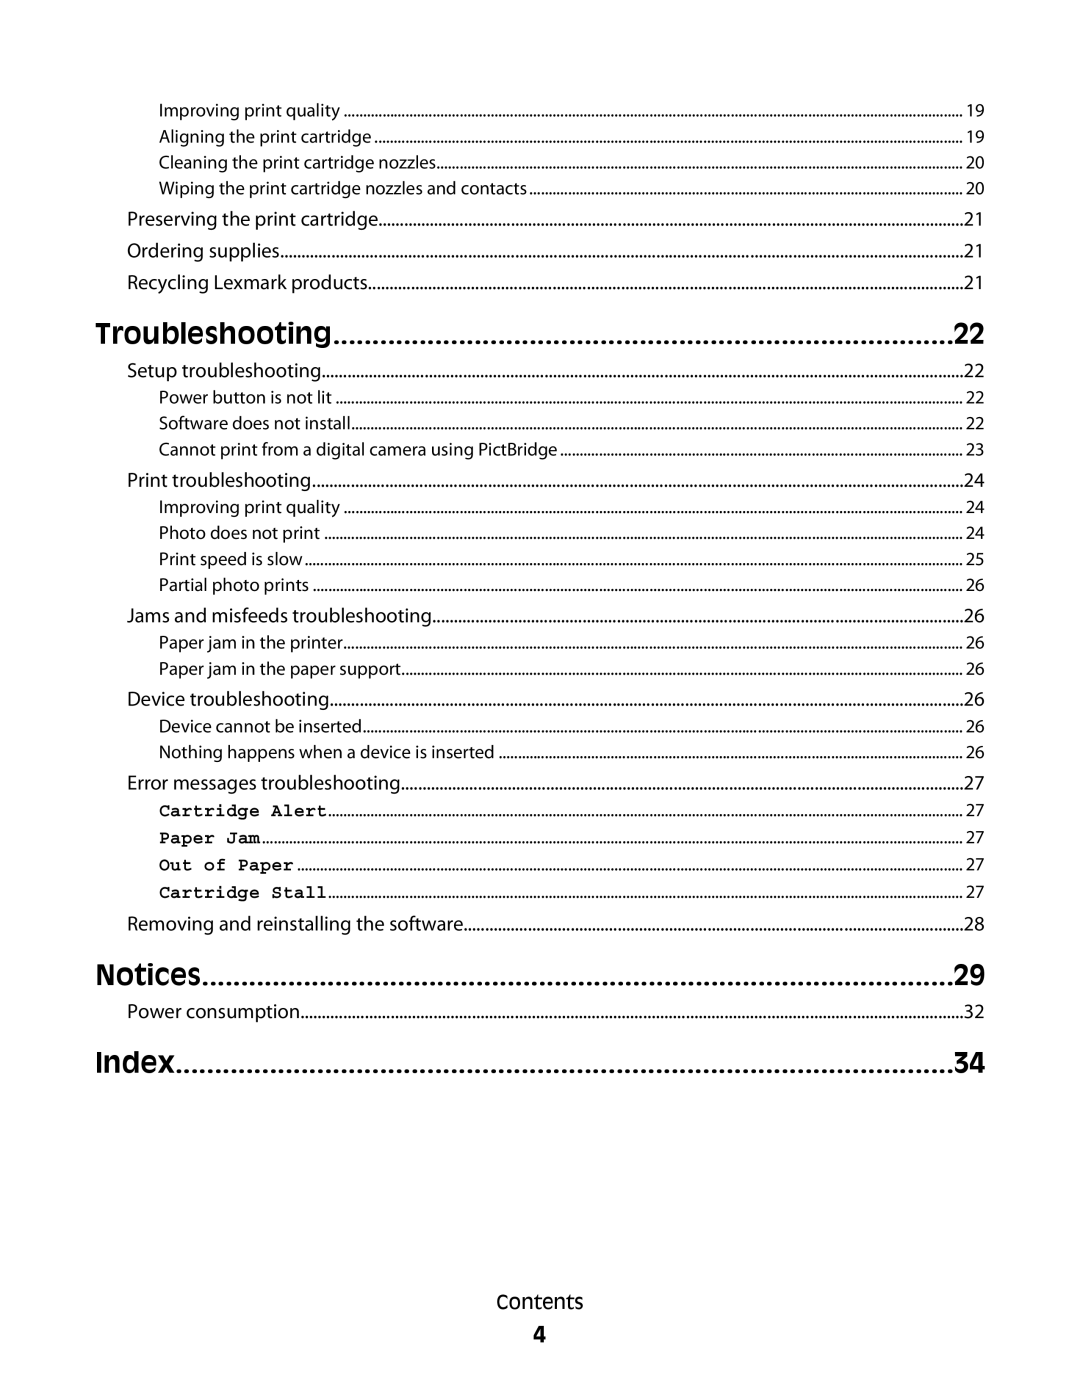 Lexmark P200 Series manual Troubleshooting, Index, Notices 